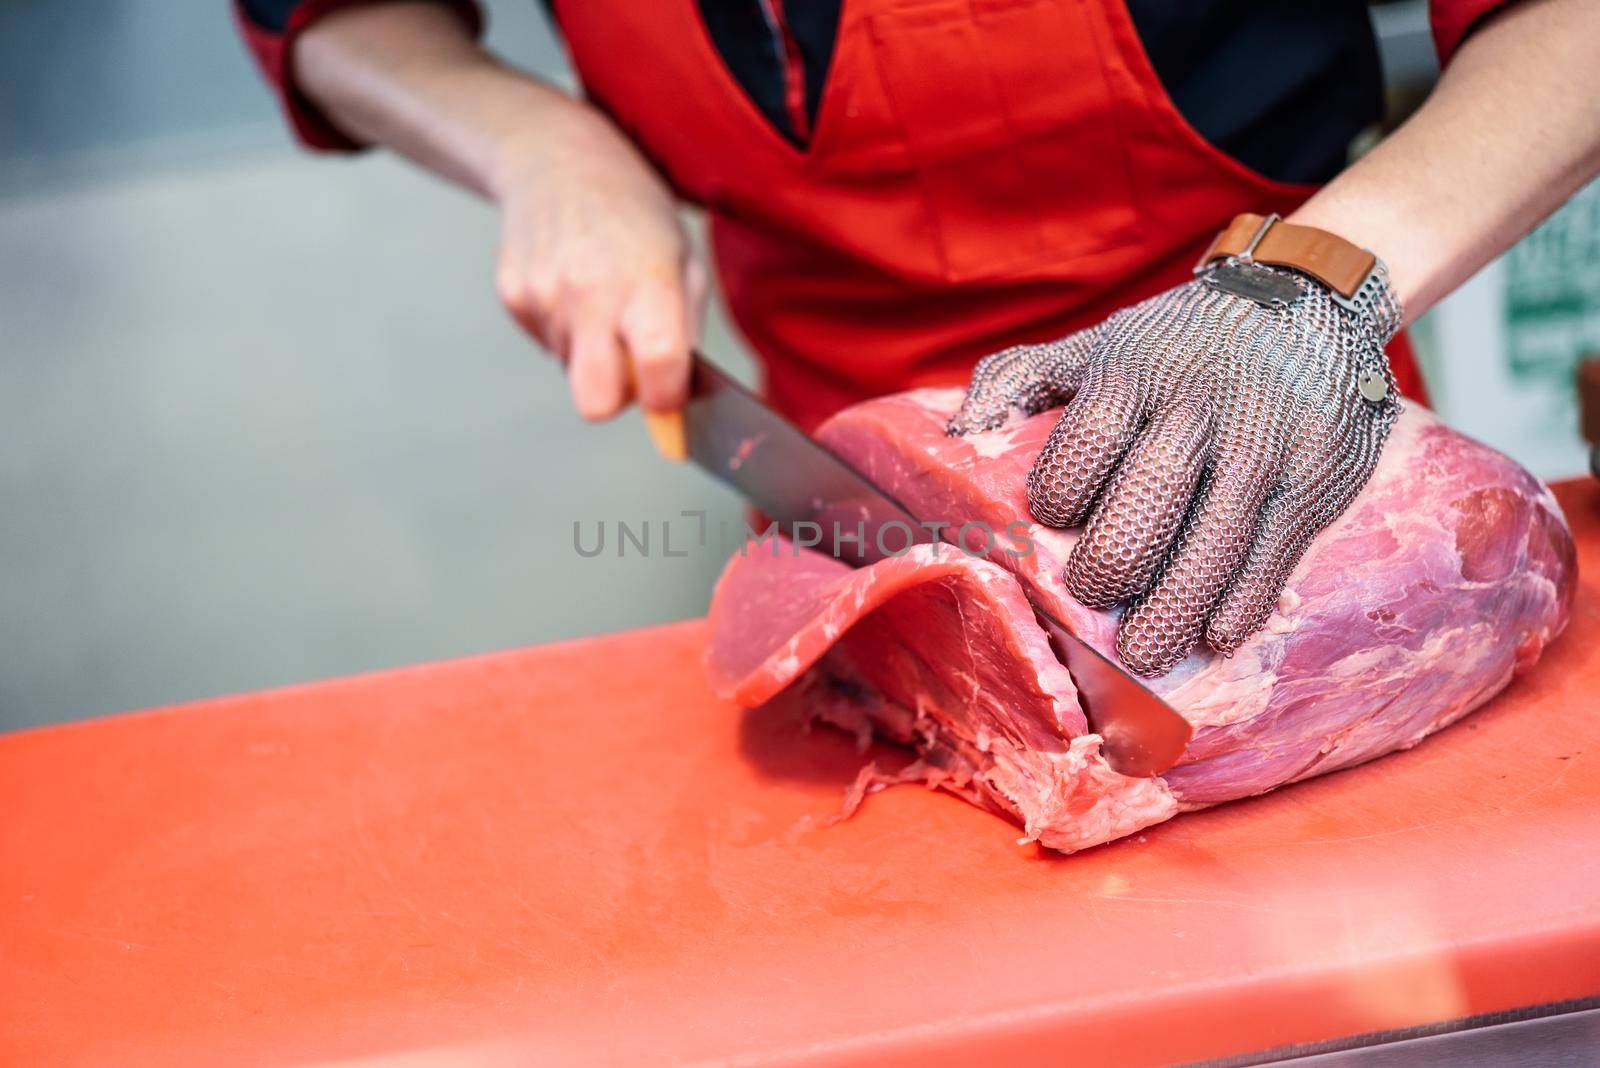 Female butcher cutting fresh meat in a butcher shop with metal safety mesh glove